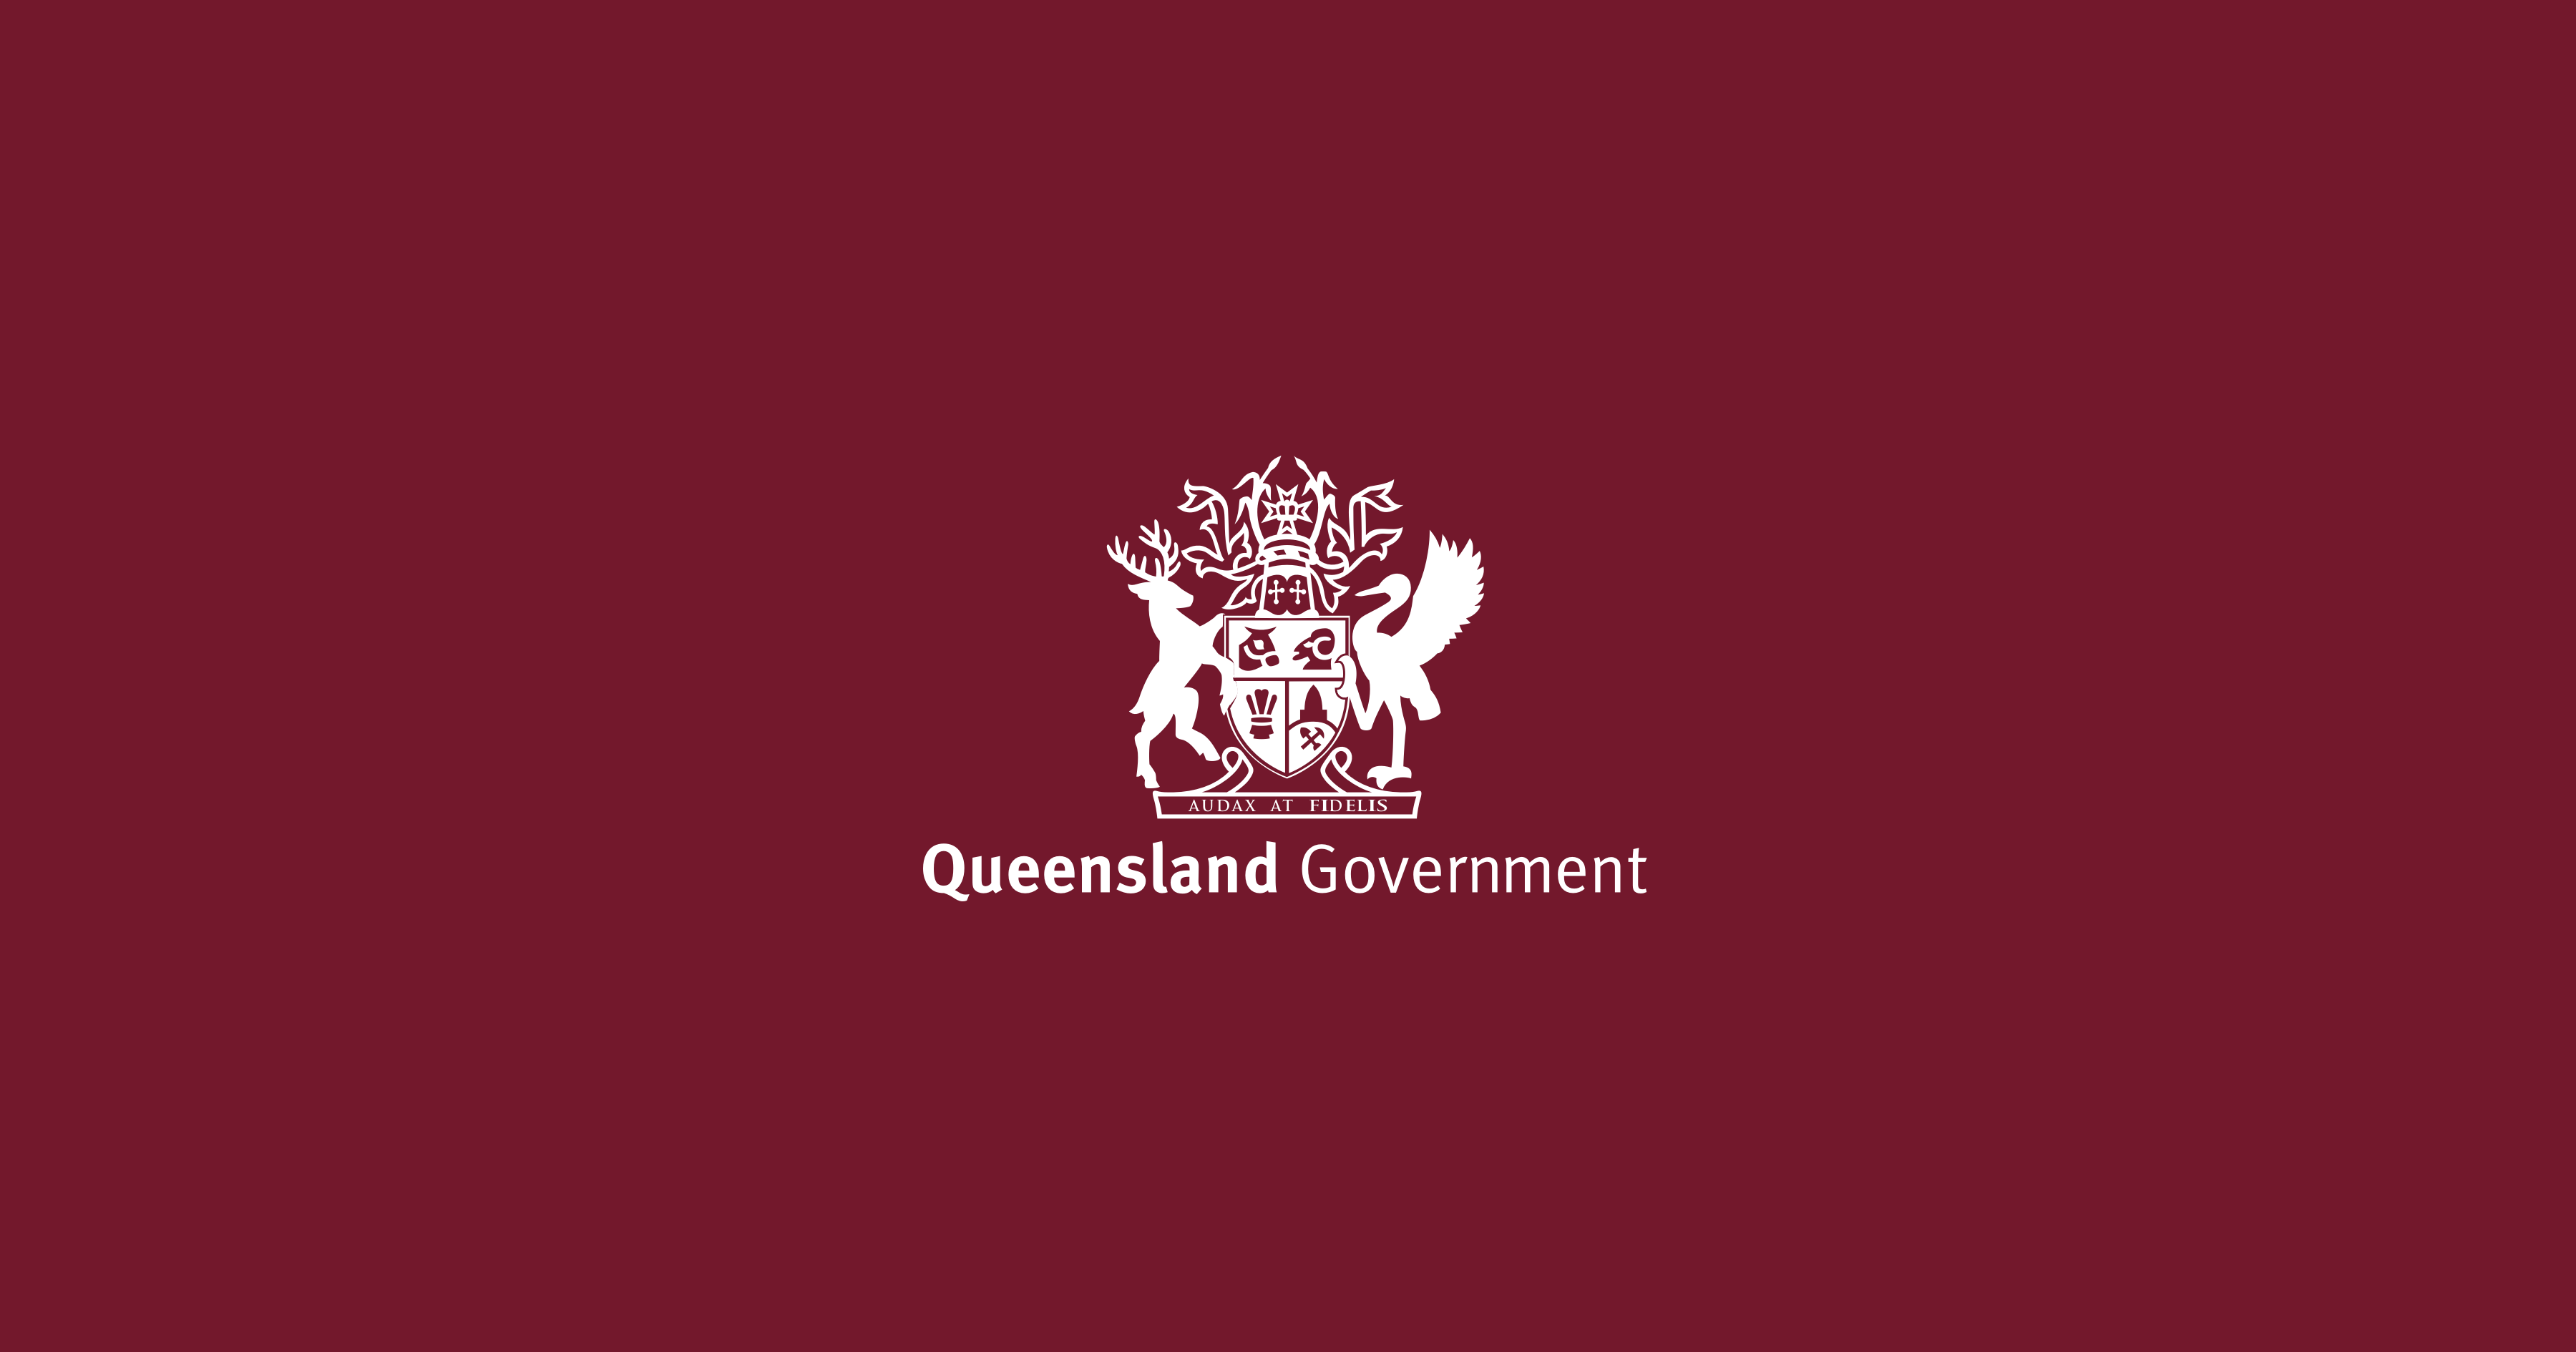 Check In Qld app is no longer required